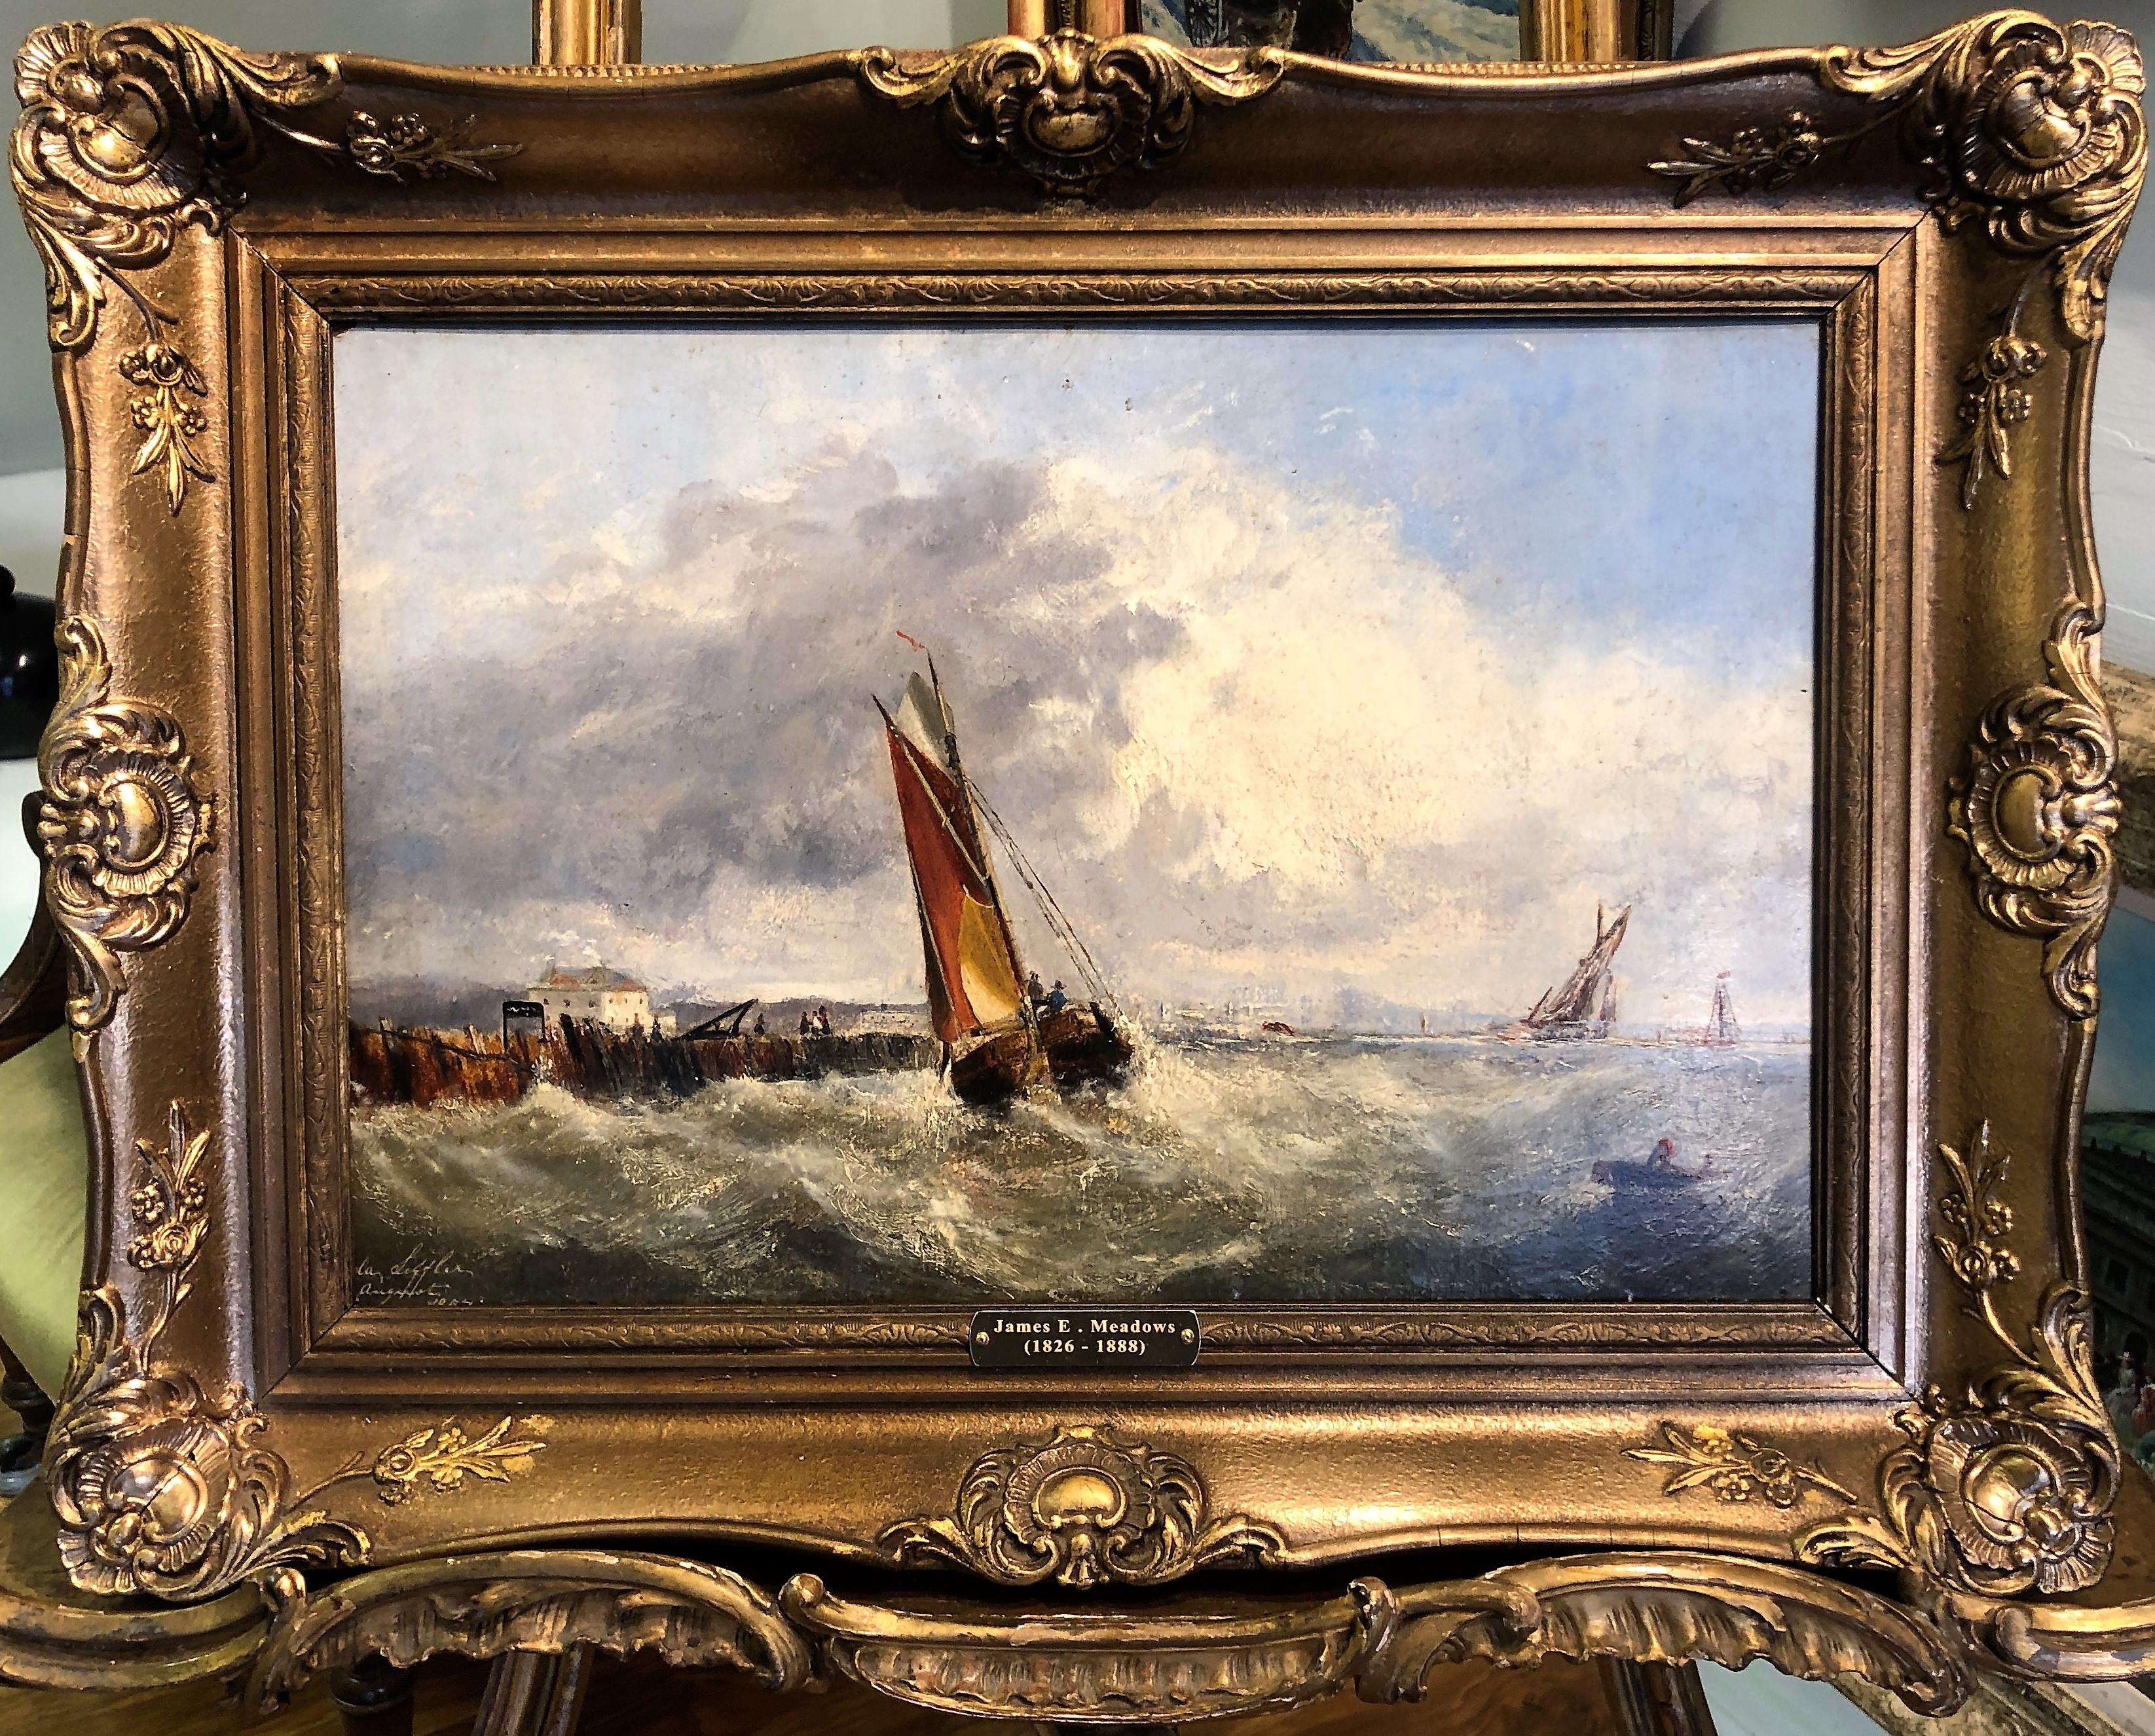 James Edward Meadows Landscape Painting – OLD MASTER OIL PAINTING High Quality 19th CENTURY SturY Stormy Seas Gold vergoldeter Rahmen